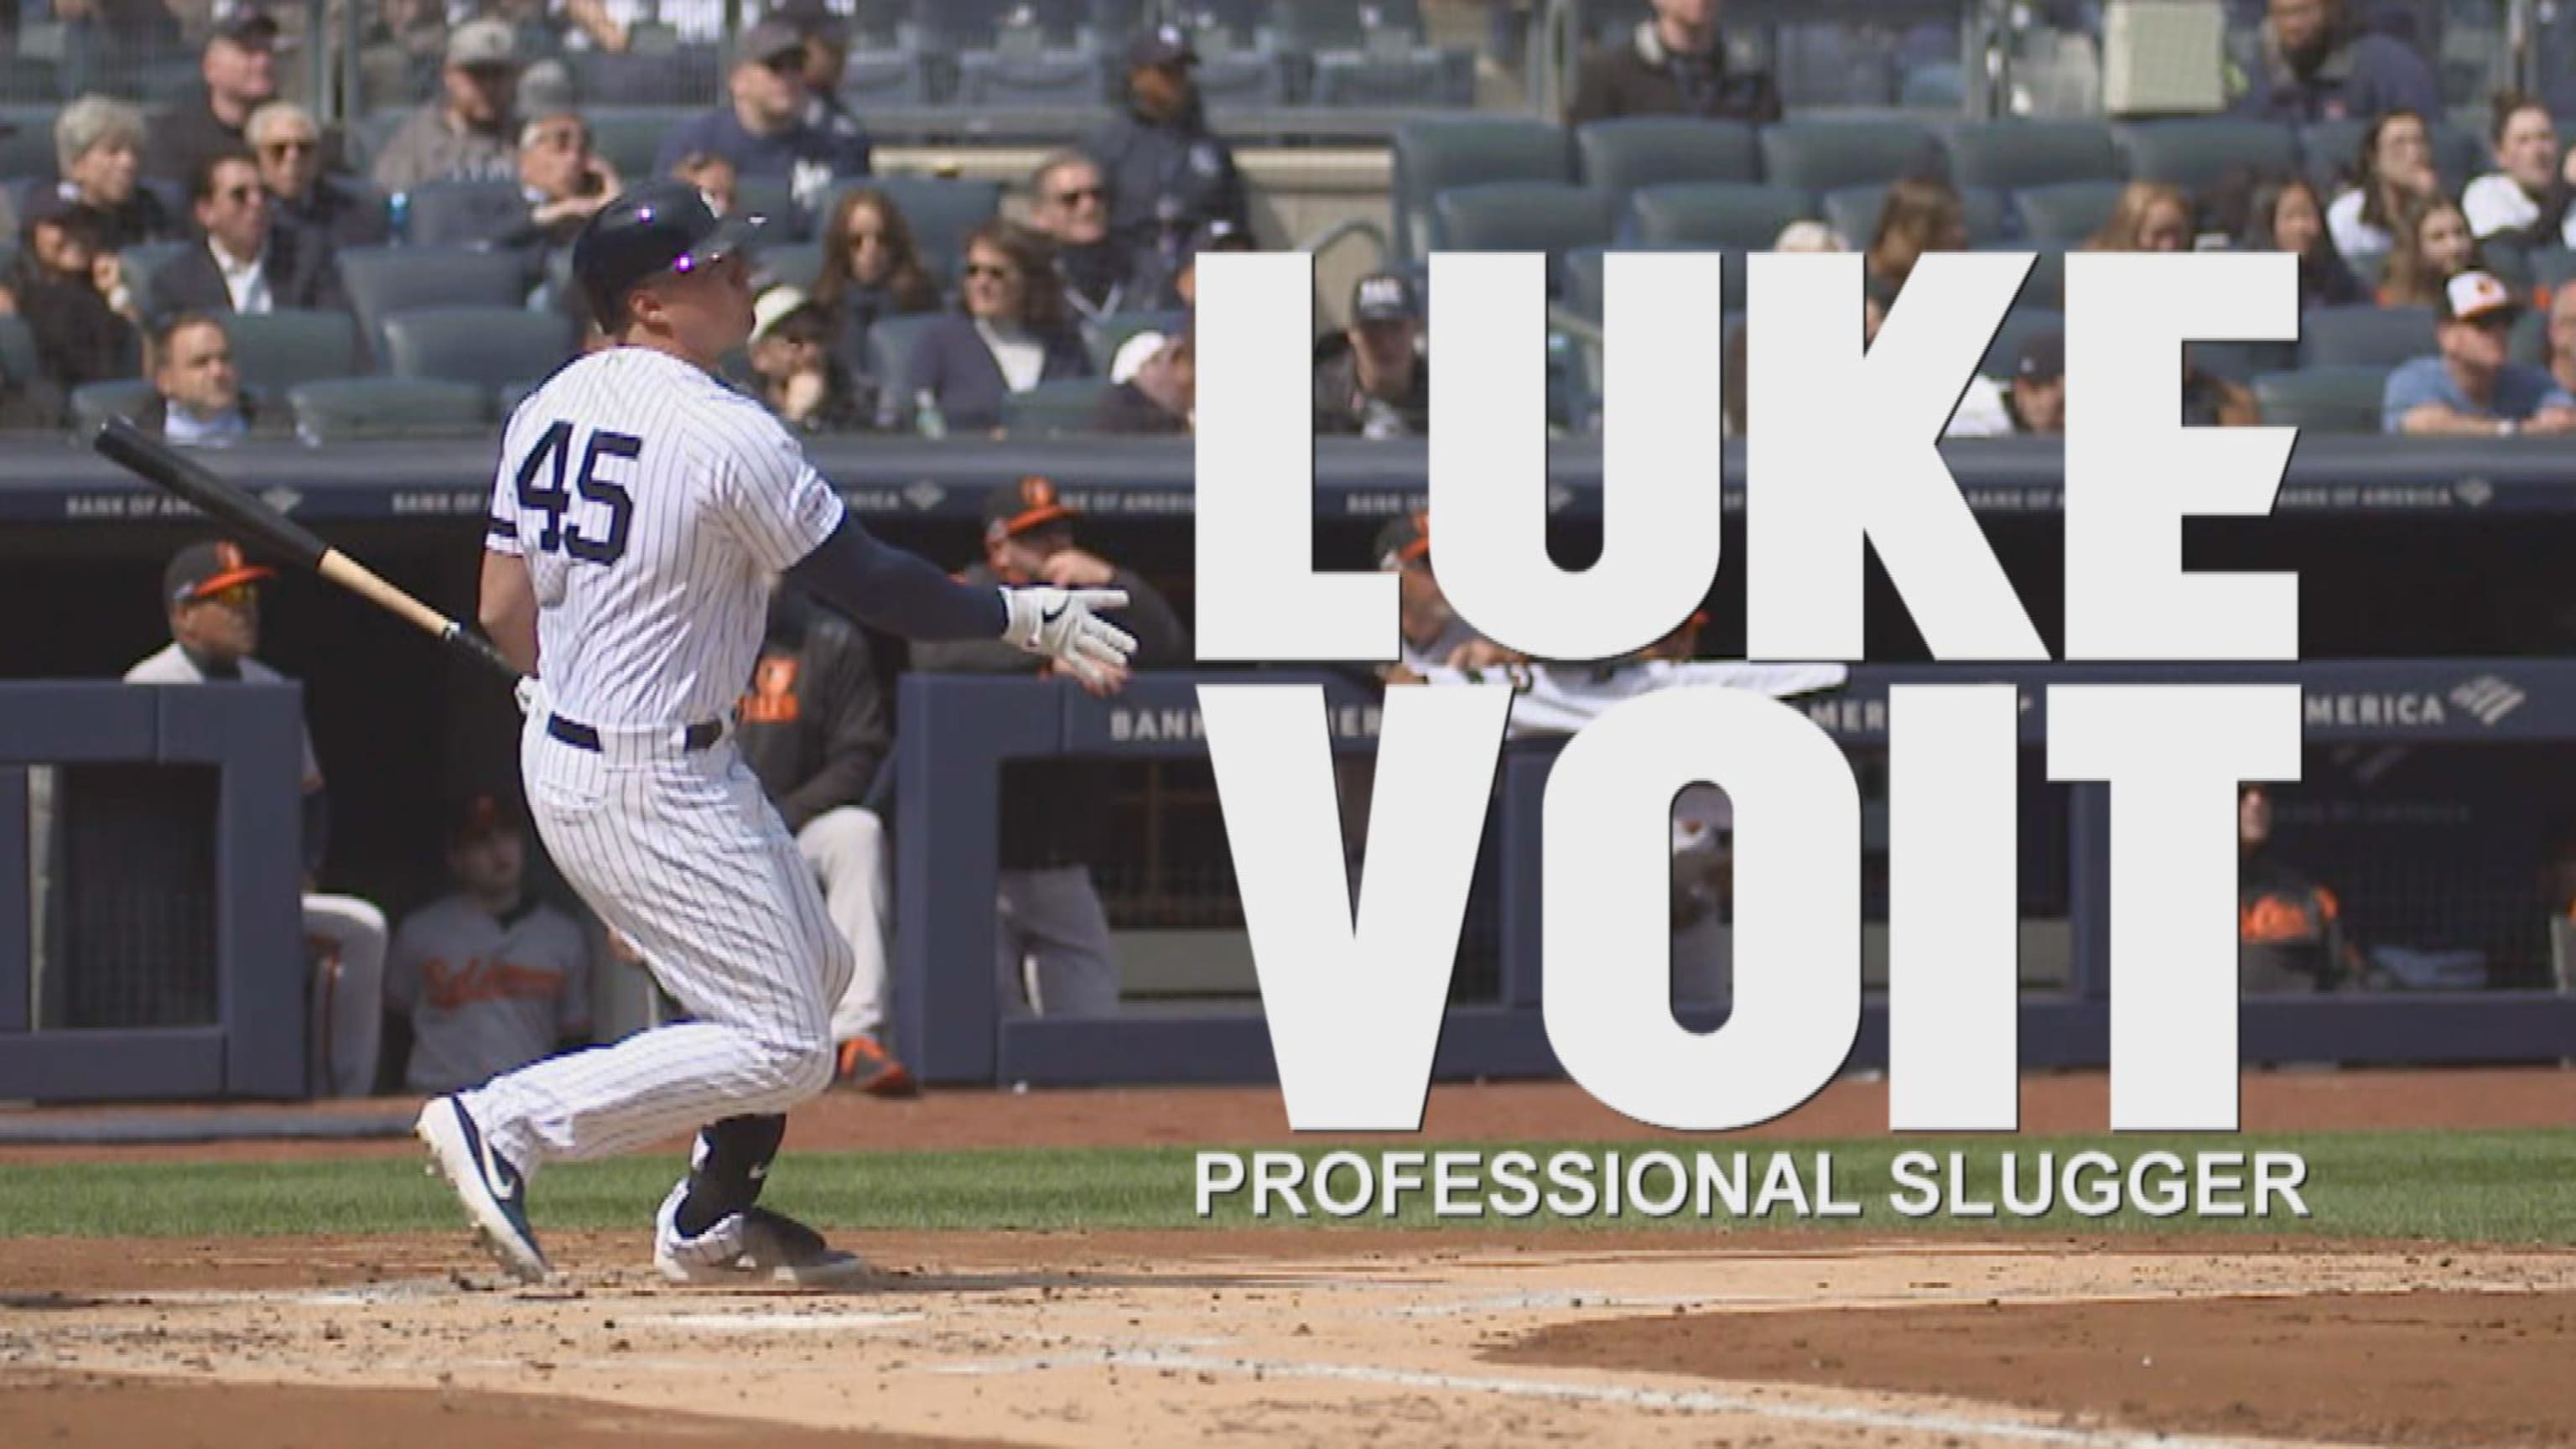 With A Chip On His Shoulder And His Jersey Unbuttoned, Luke Voit